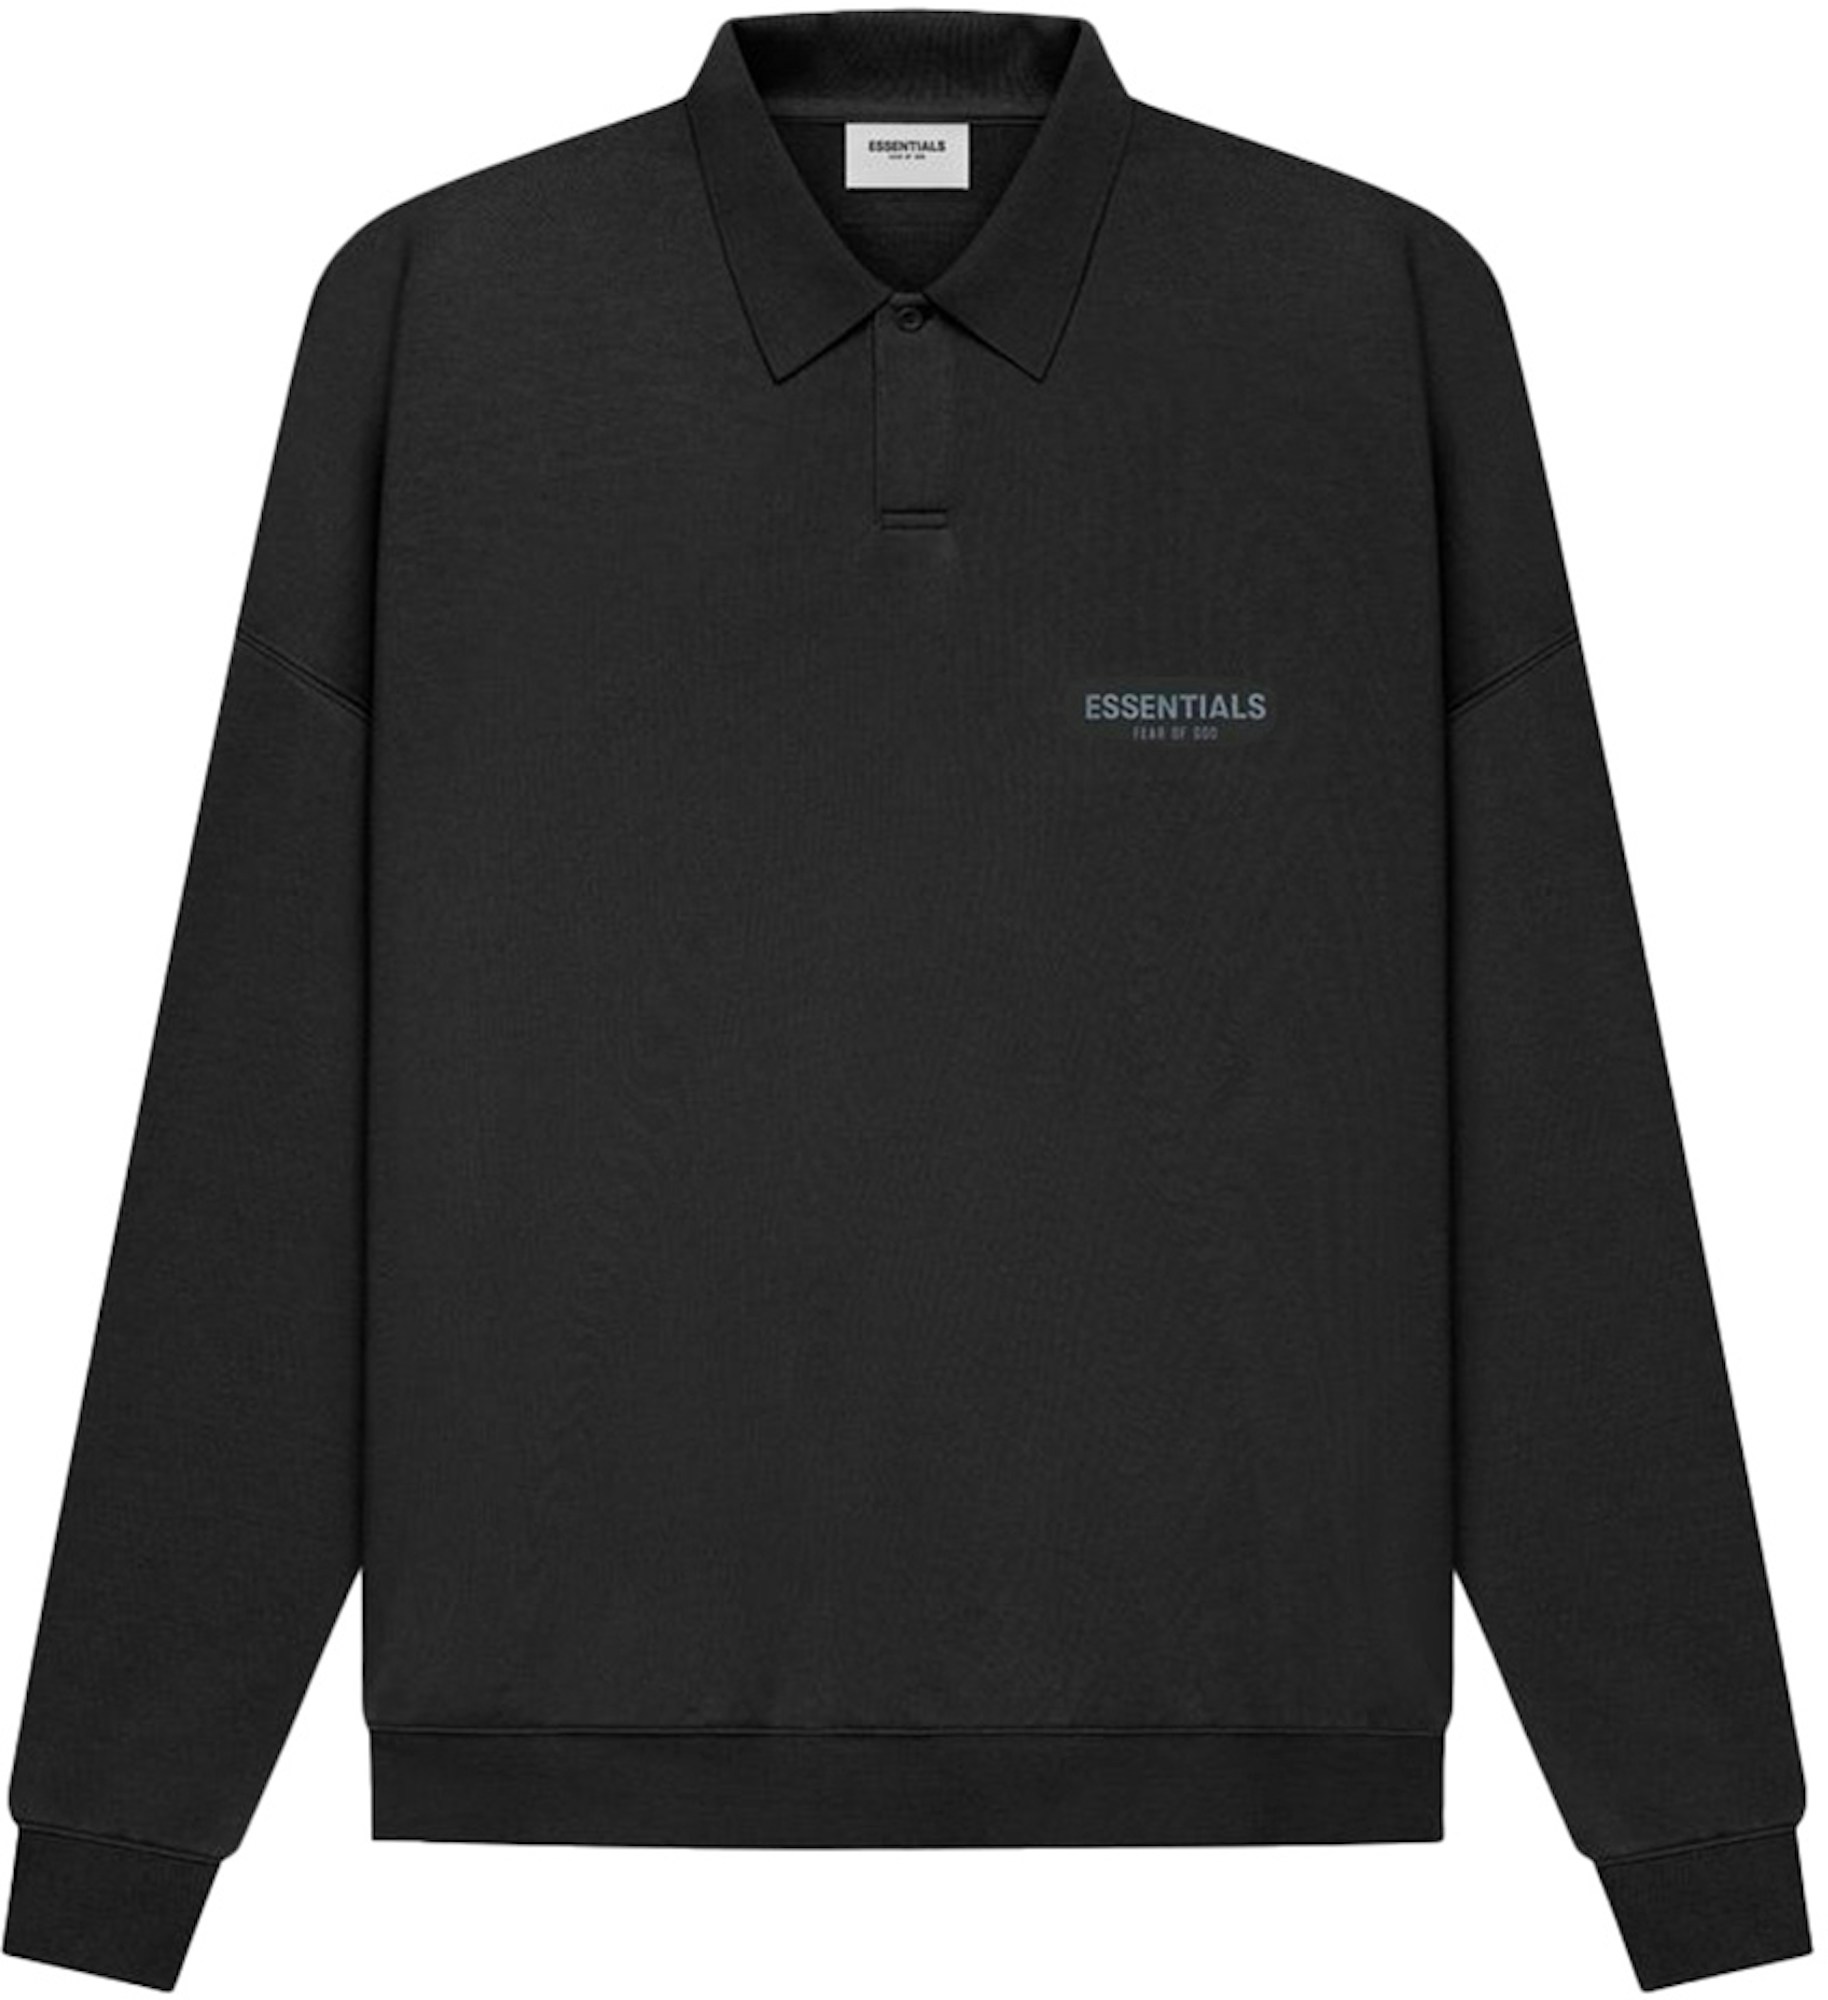 FEAR OF GOD ESSENTIALS Long Sleeve French Terry Polo Black - SS21